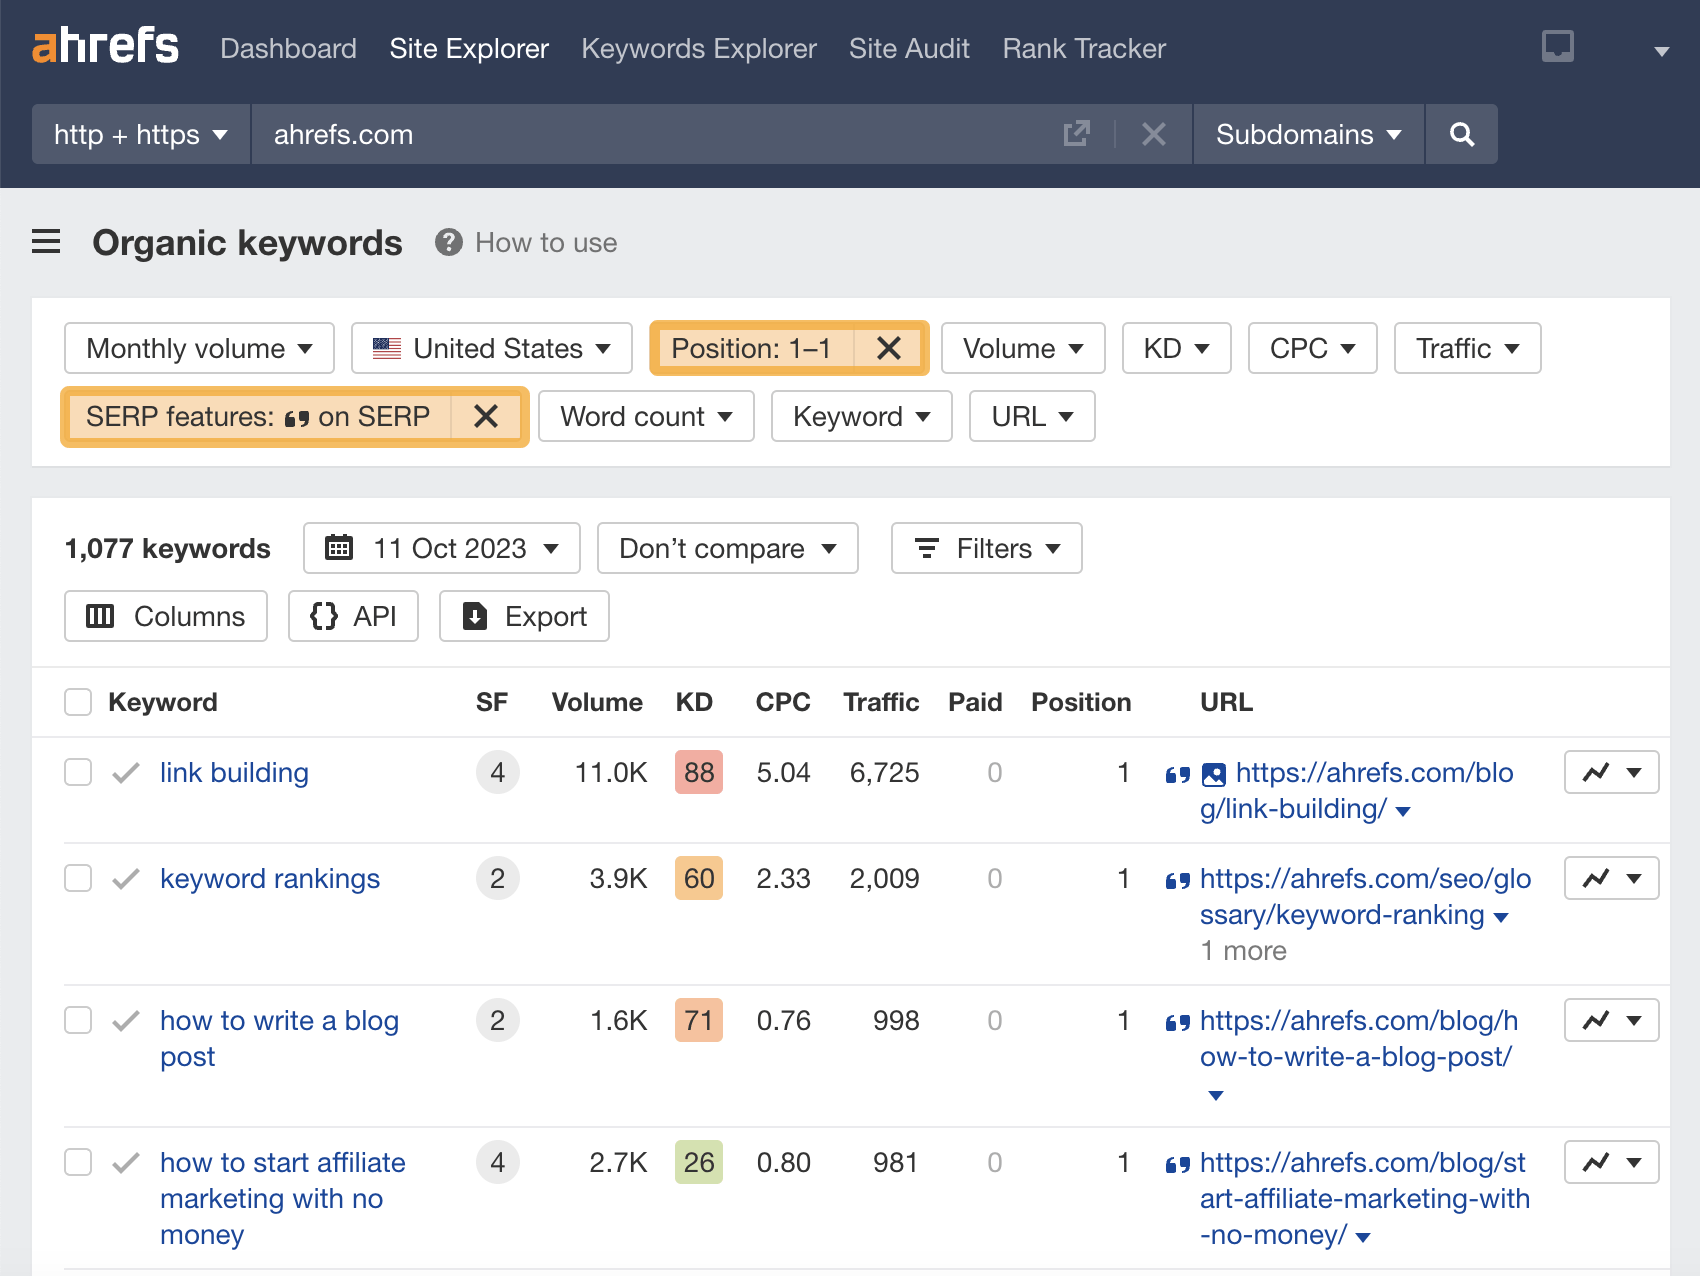 Organic keywords report with SERP features filter, via Ahrefs' Site Explorer
